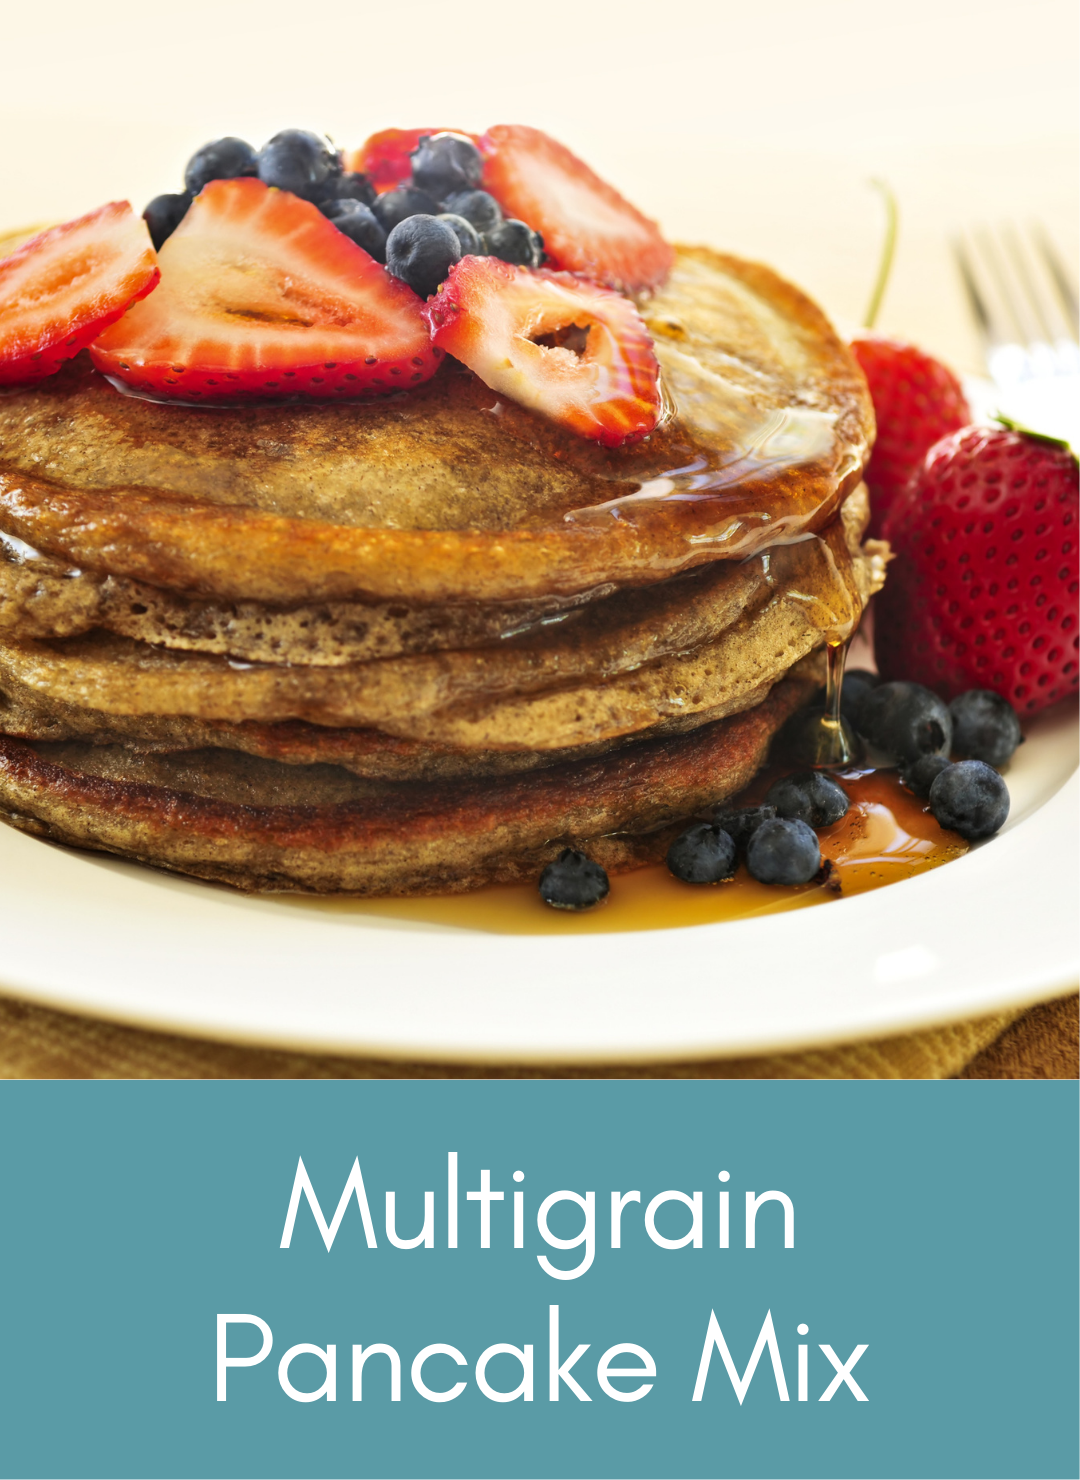 Multigrain pancake stack with berries Picture with link to recipe